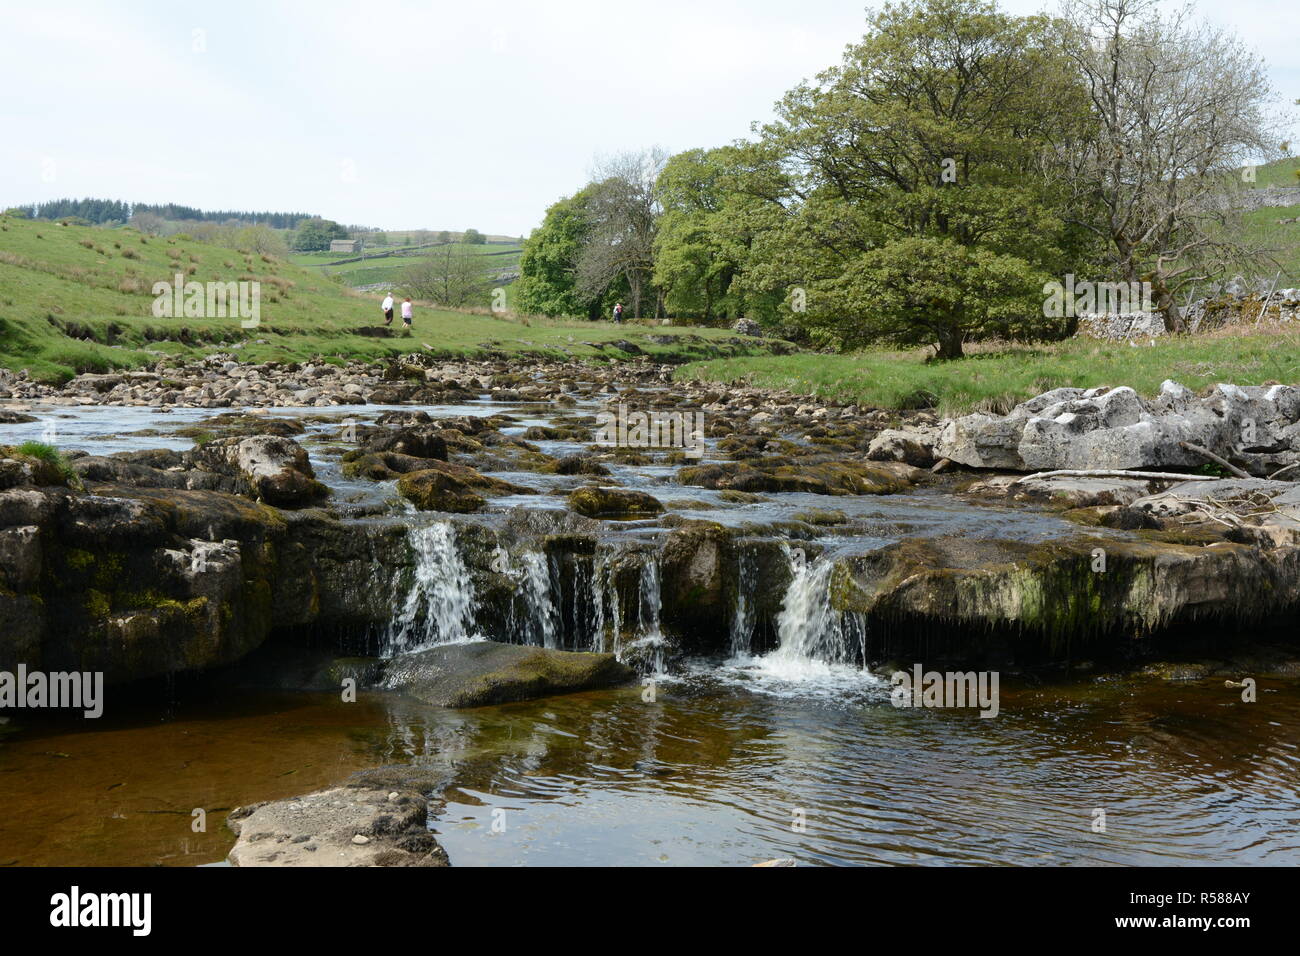 Two walkers traveling along the banks of the river Wharfe, near Buckden, on the Dales Way hiking trail, Yorkshire, Northern England, United Kingdom. Stock Photo